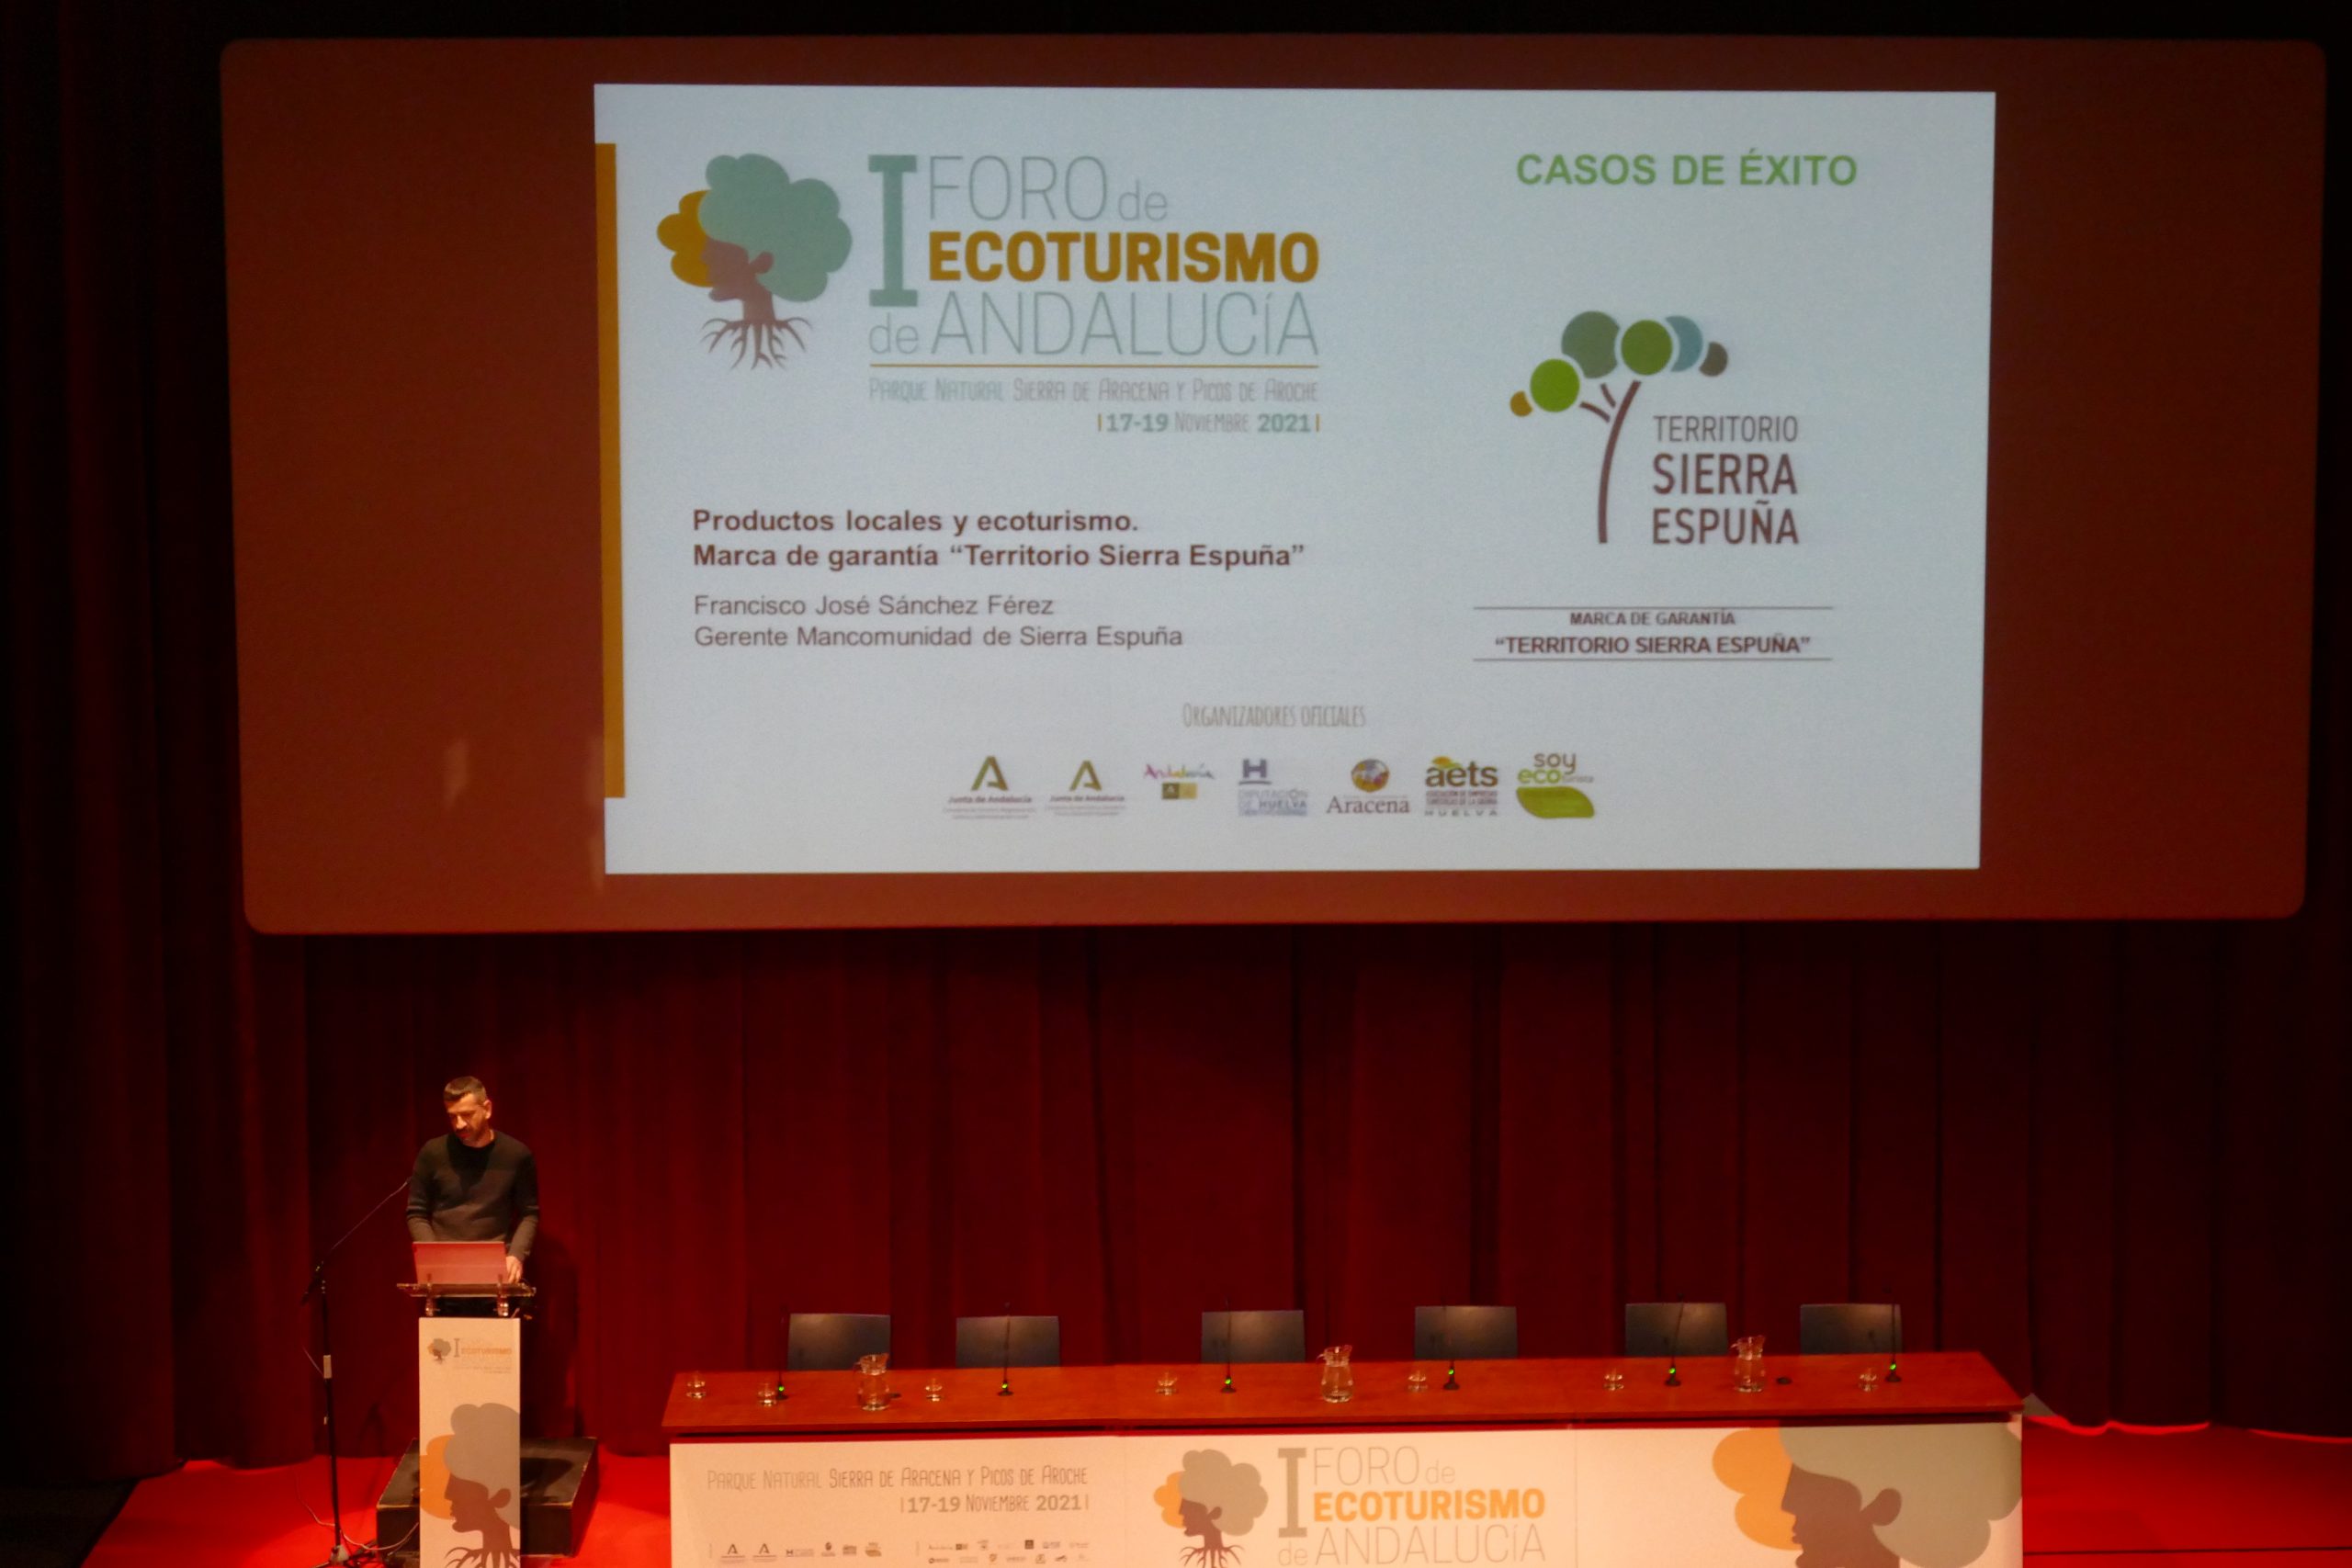 Local products and ecotourism. The brand "Territorio Sierra Espuña".